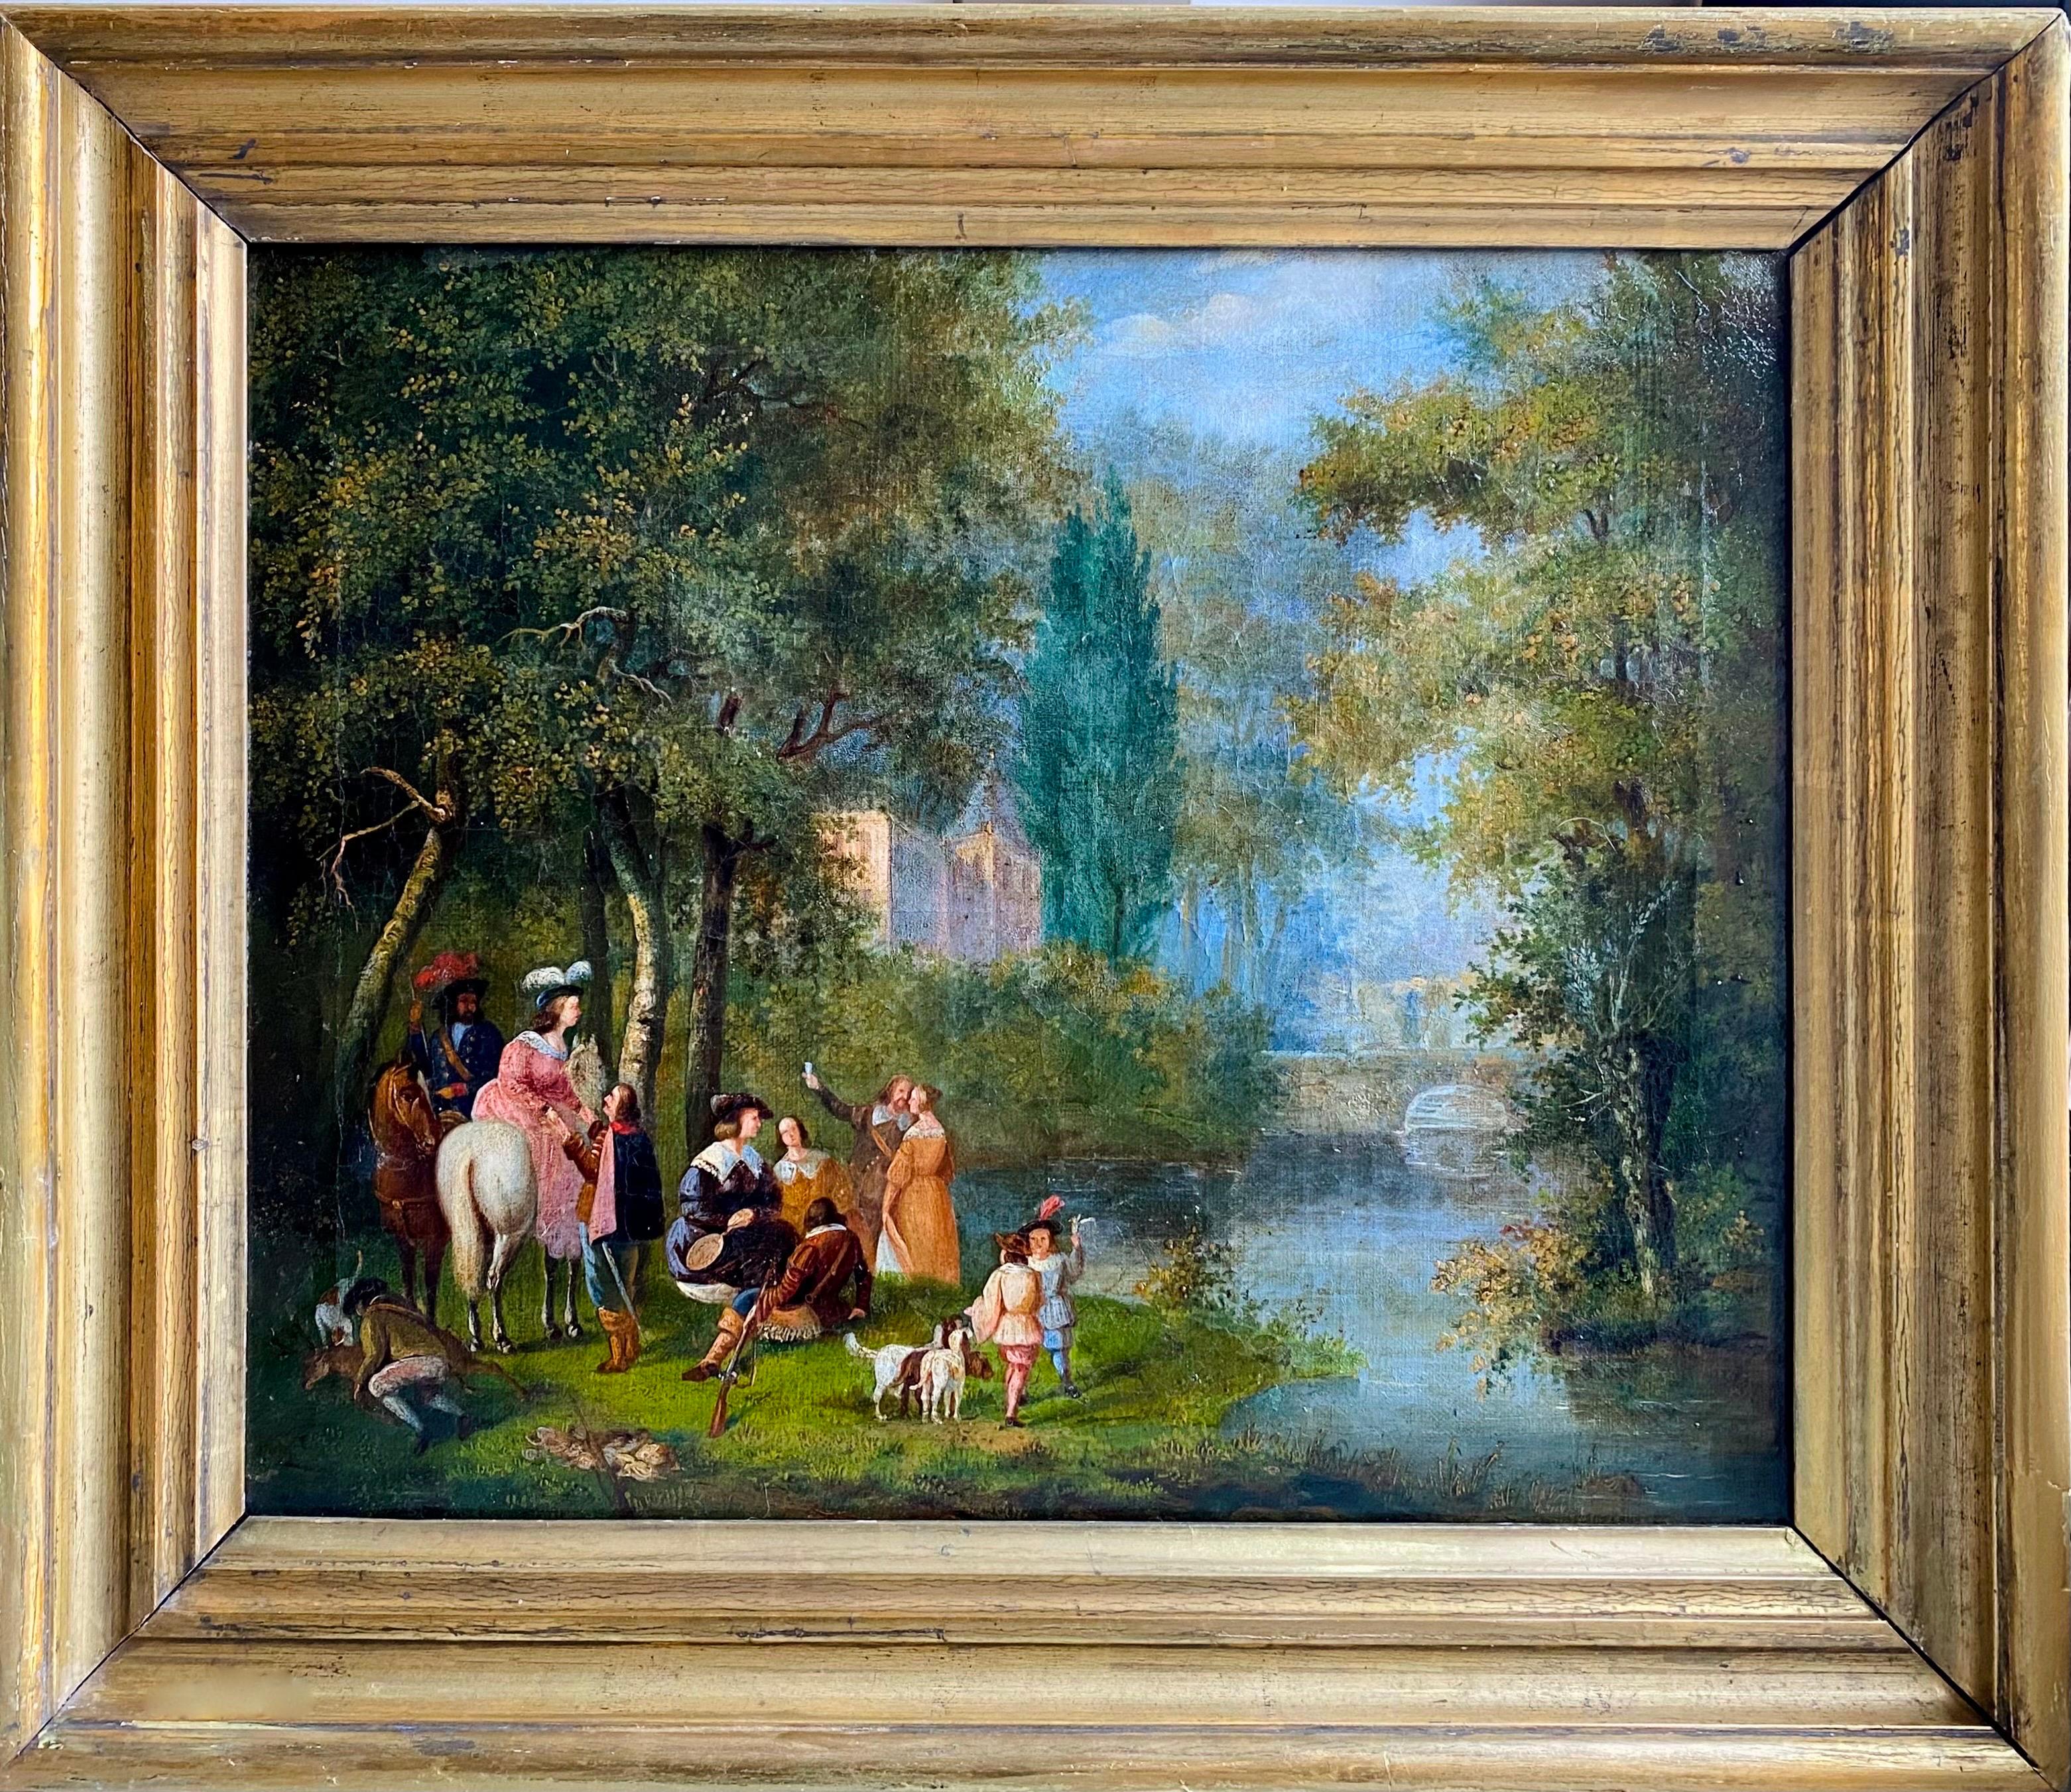 Unknown Figurative Painting - 19th century French romantic painting - Celebrations in a park landscape